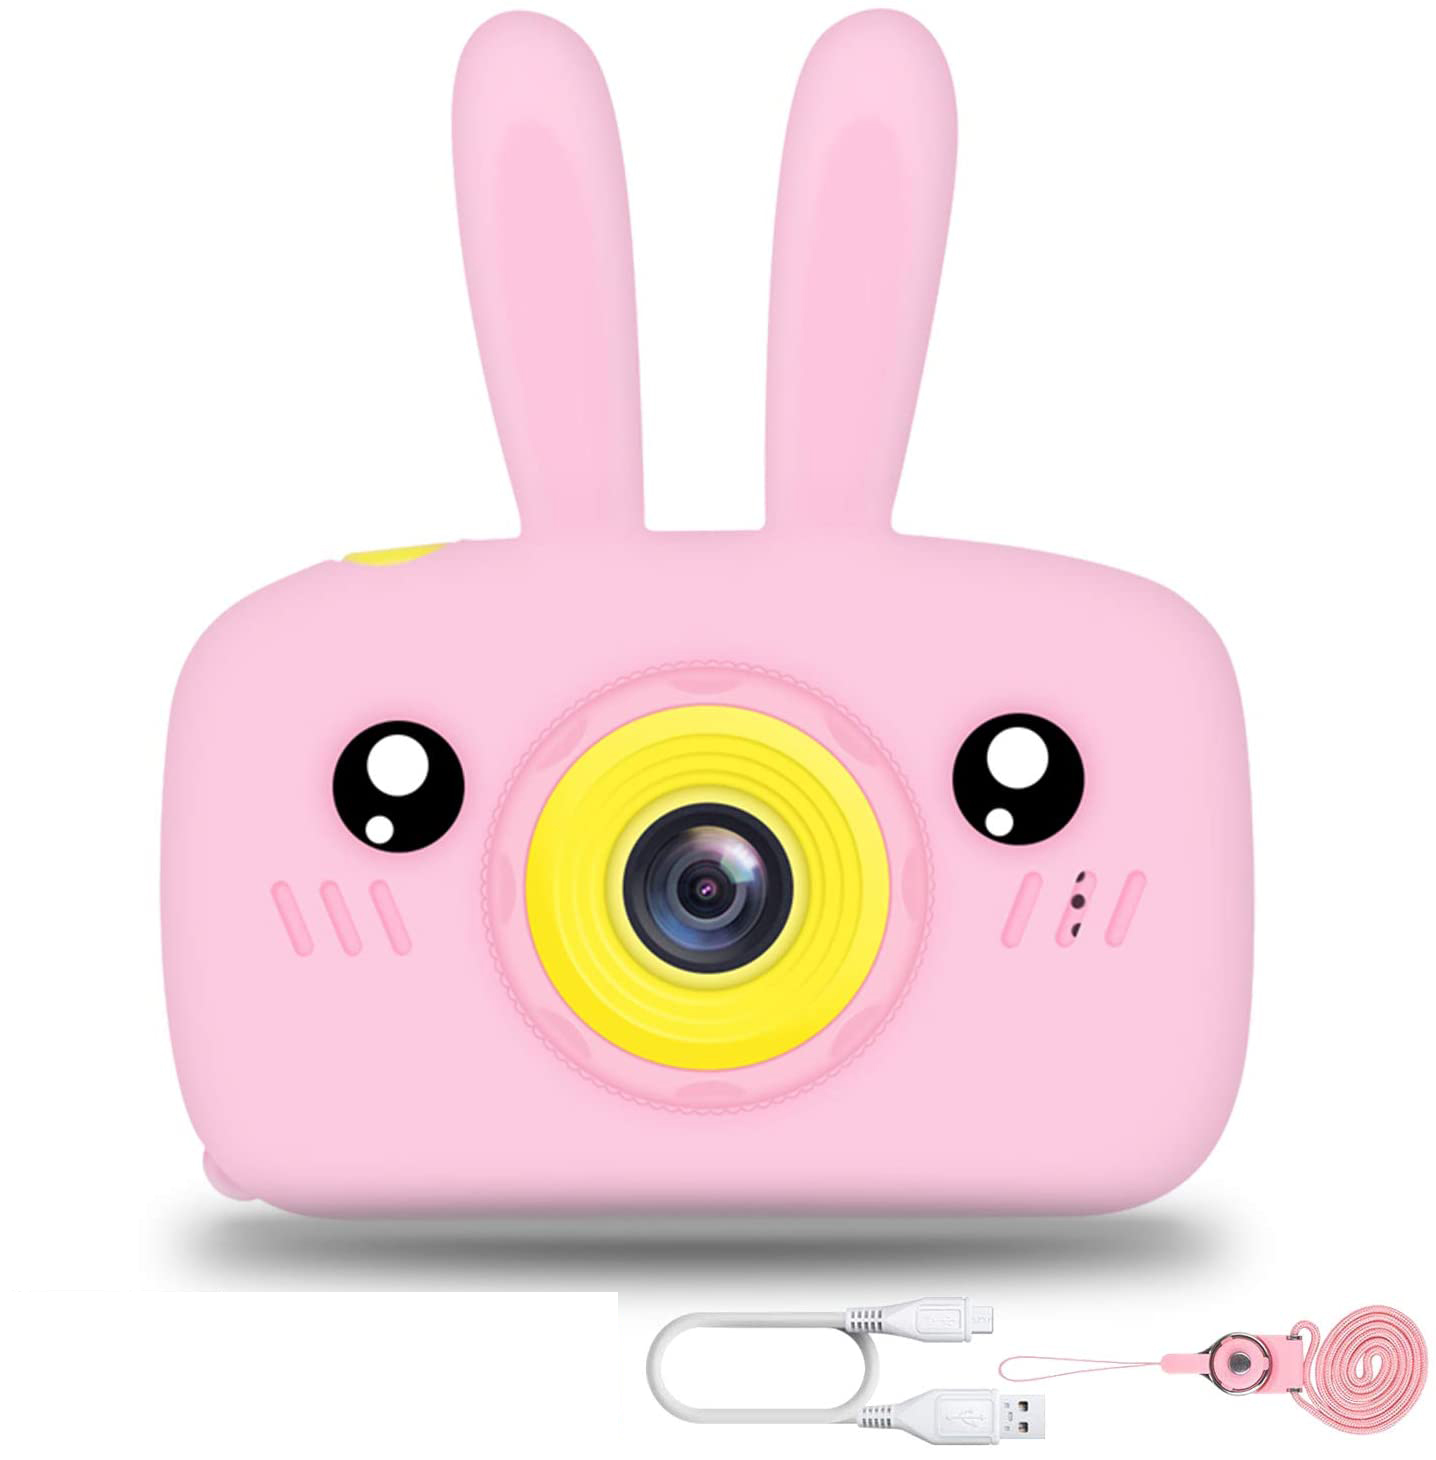 HD 1080P Digital Camera with Video Recorder Camcorder and Games TOYS for Children (Pink Rabbit)